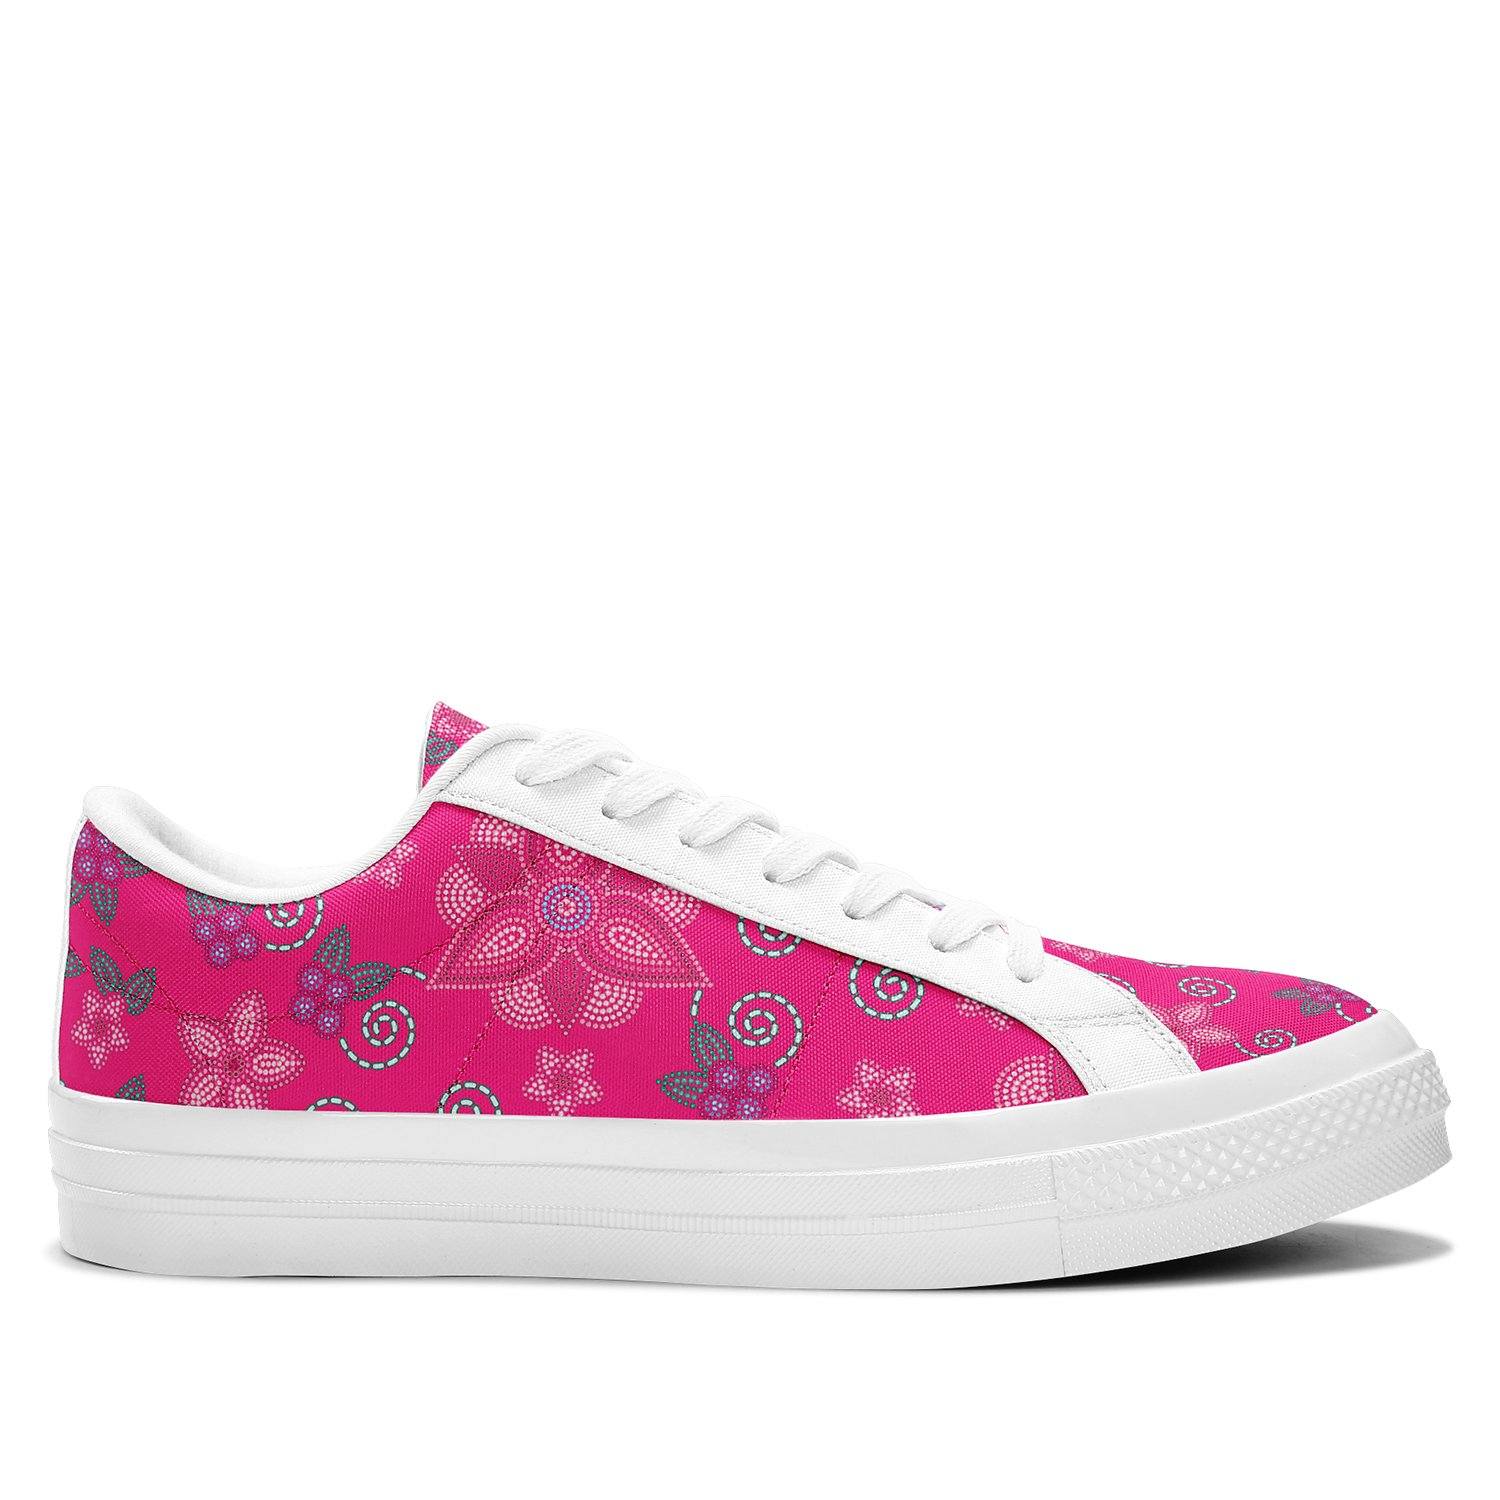 Berry Picking Pink Aapisi Low Top Canvas Shoes White Sole aapisi Herman 